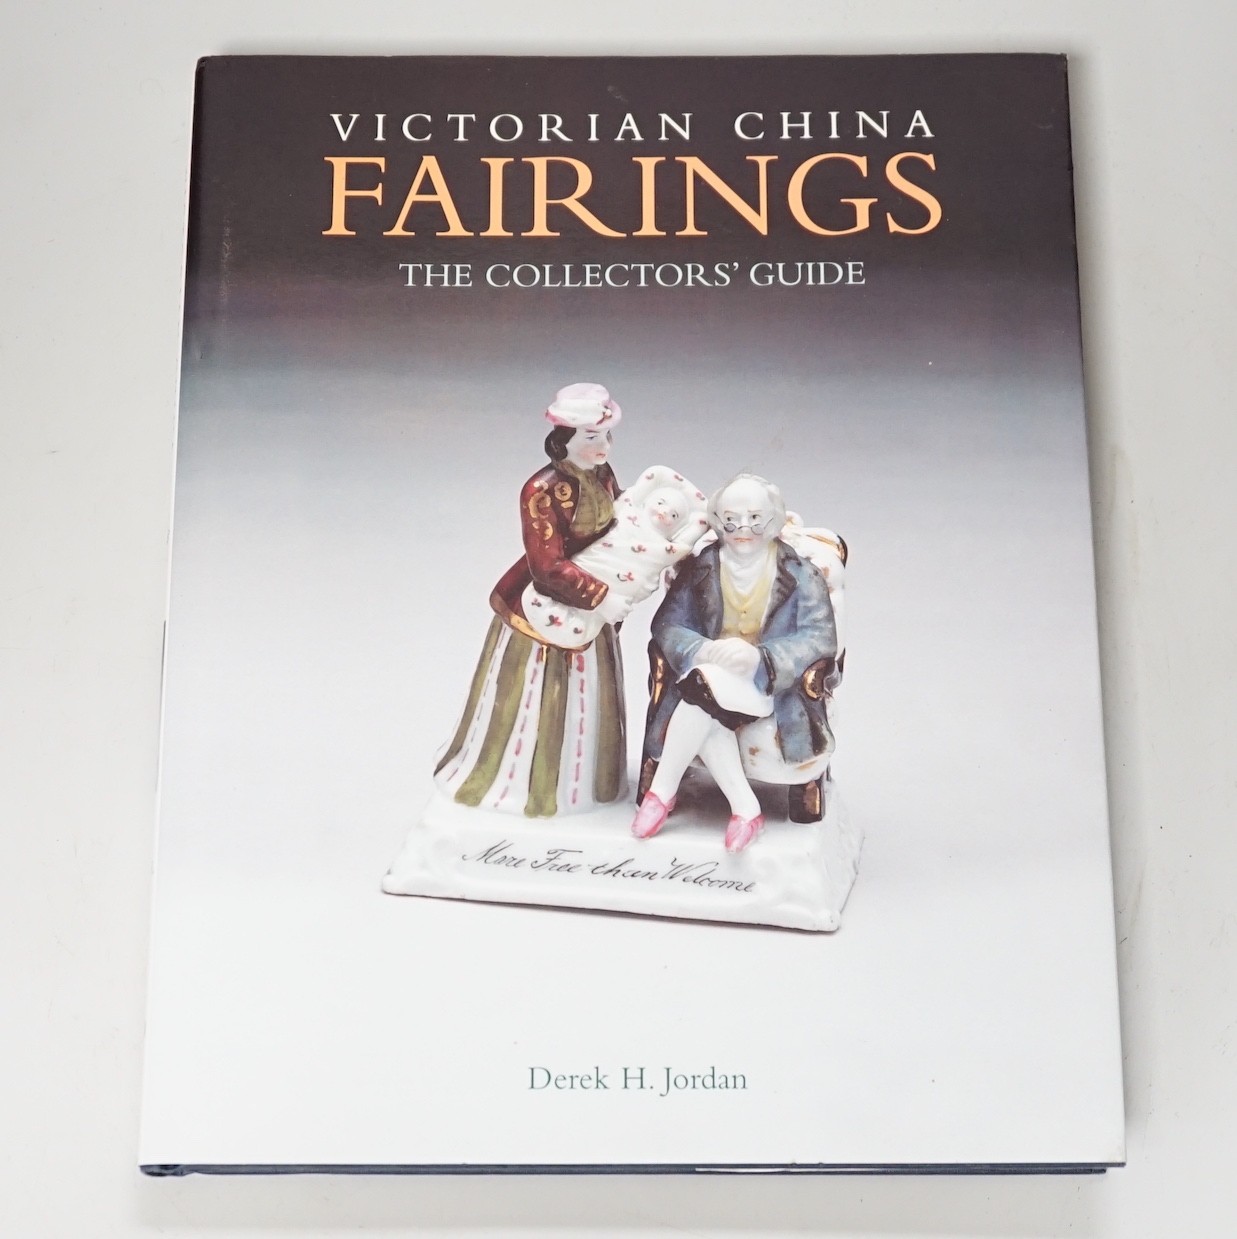 A collection of 14 German porcelain Fairings and a related book - Antiques collectors guide by Derek H. Jordan                                                                                                              